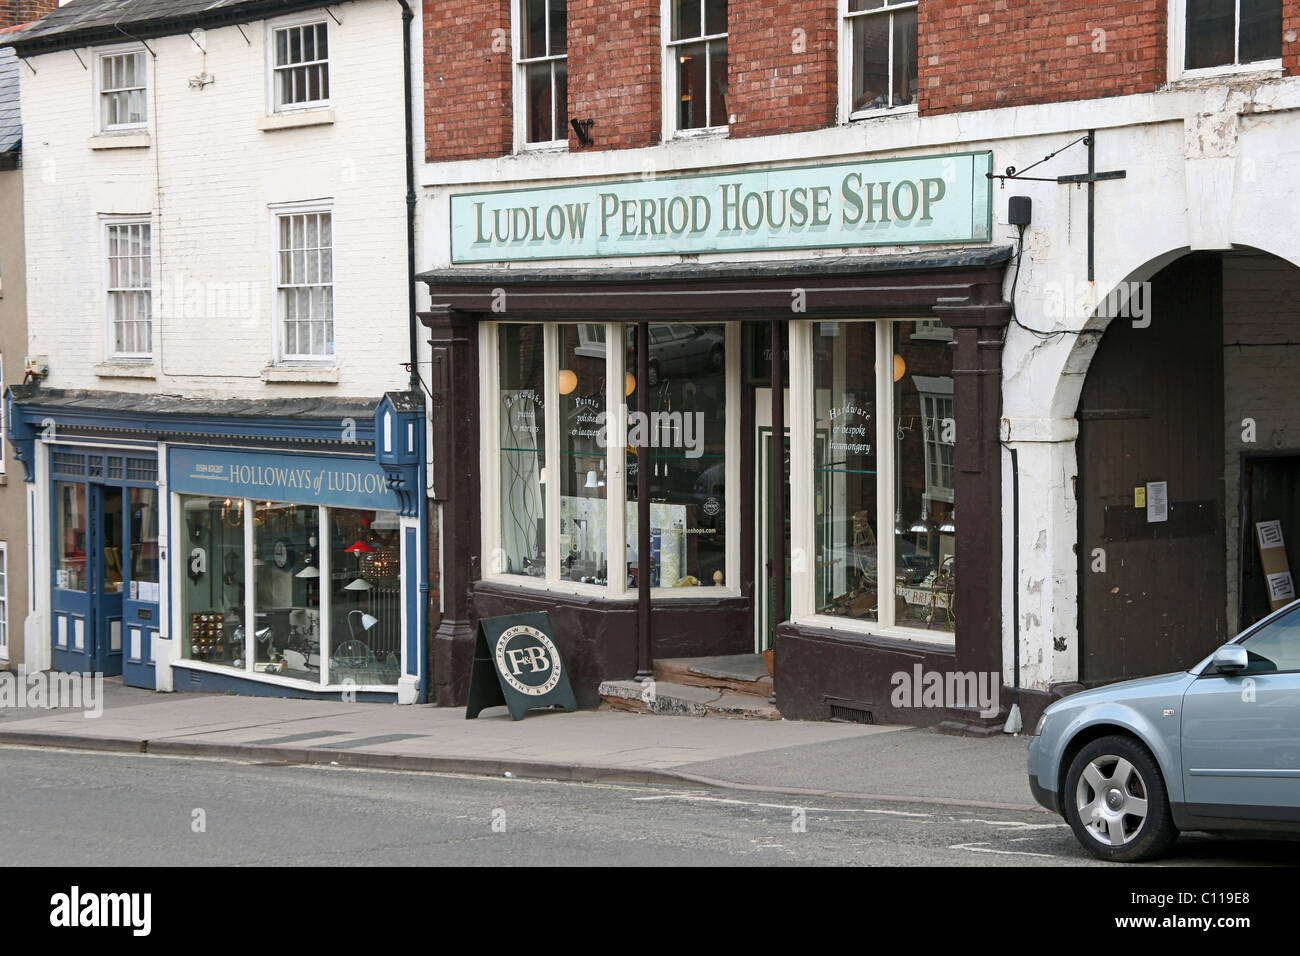 The Period House Shop in Corve Street, Ludlow, Shropshire, England, UK Stock Photo